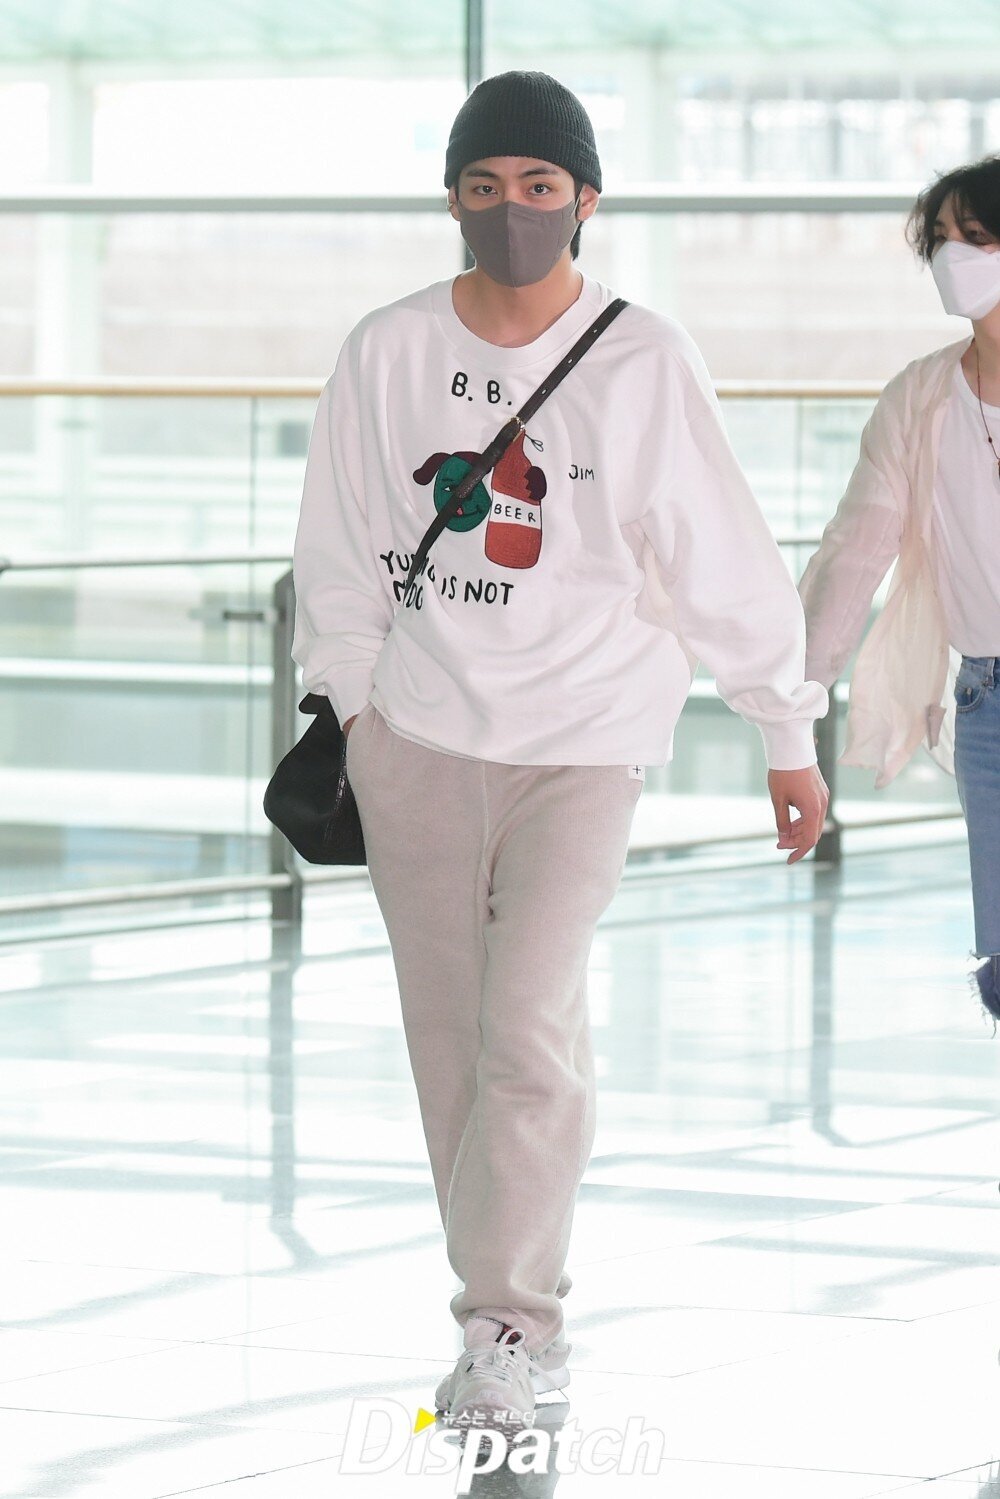 X \ BTS V News / ʟᴀʏᴏ(ꪜ)ᴇʀ على X: [190212 Naver articles about #BTSV's  eyes, visual and airport fashion at incheon] 13.  14. 15.  16. 🌟LIKE, RECOMMEND AND